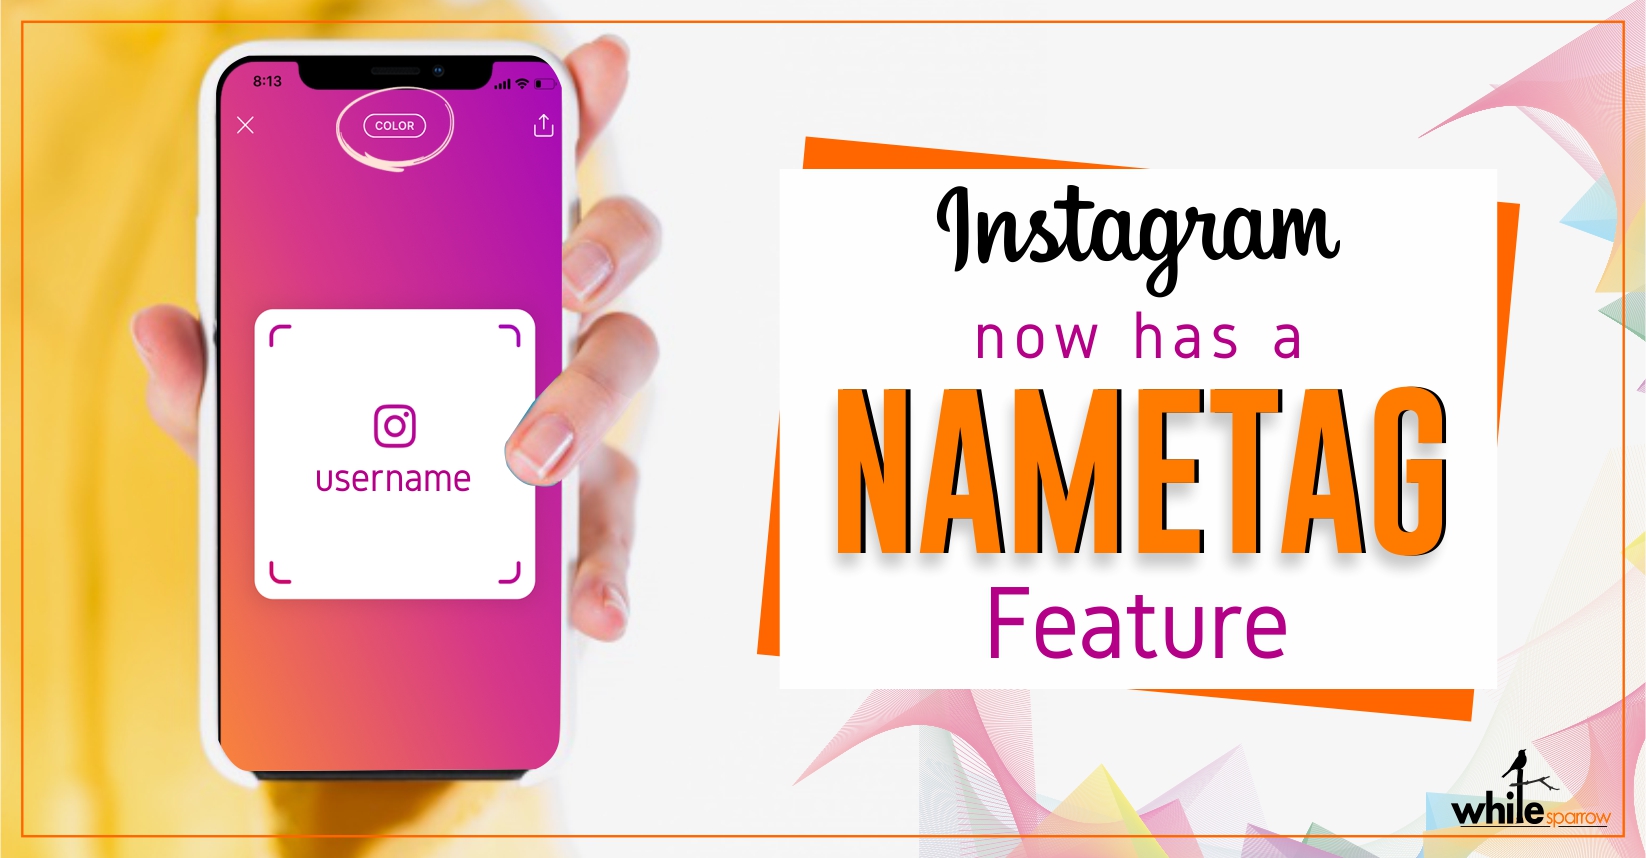 Instagram now has a Nametag feature